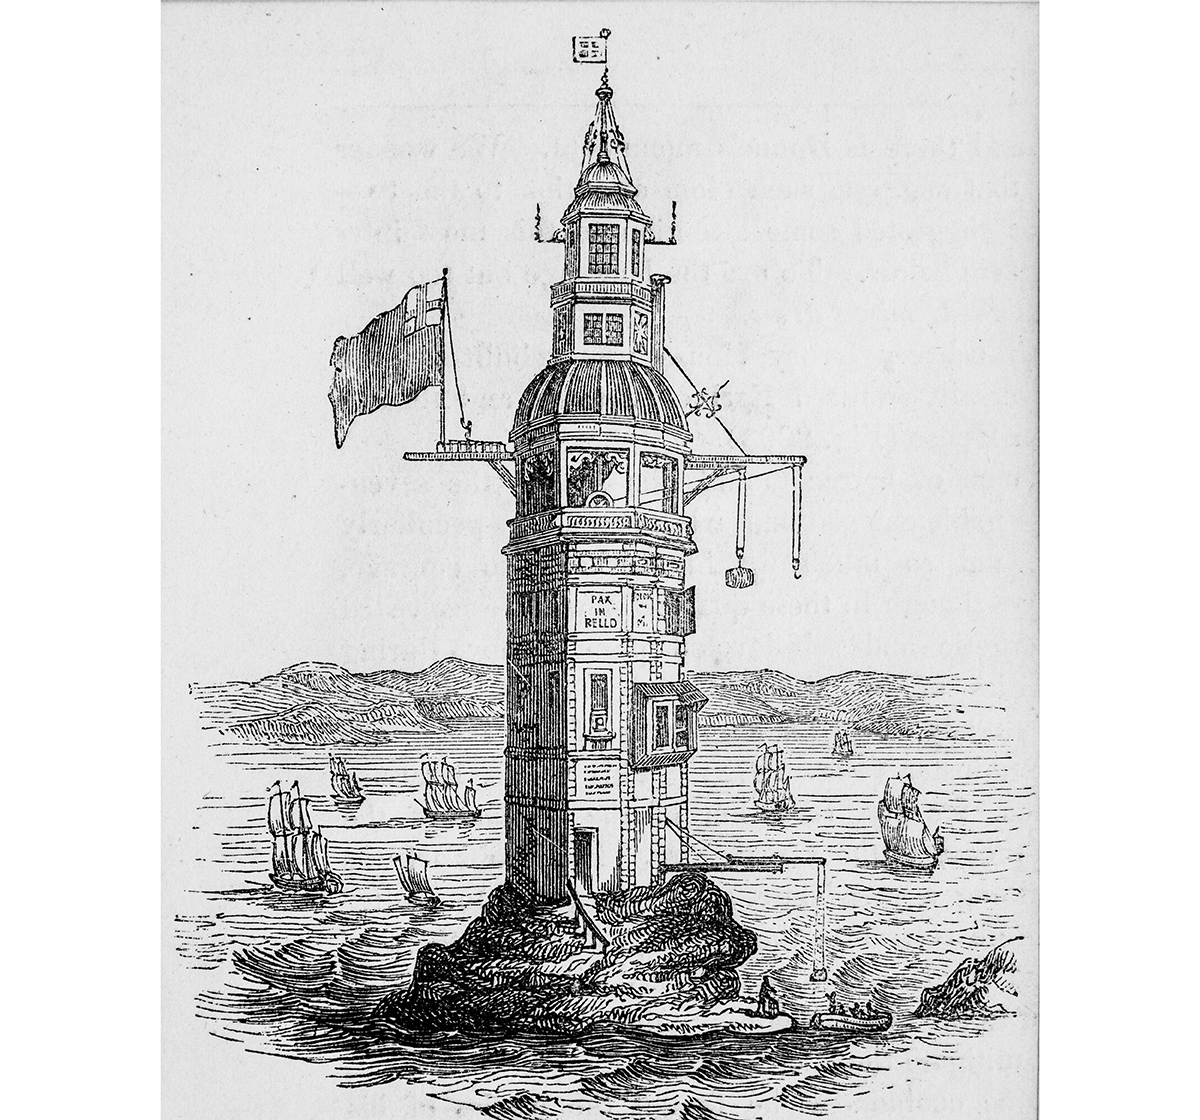 1699 - Winstanley's lighthouse on the Eddystone as it was in 1699